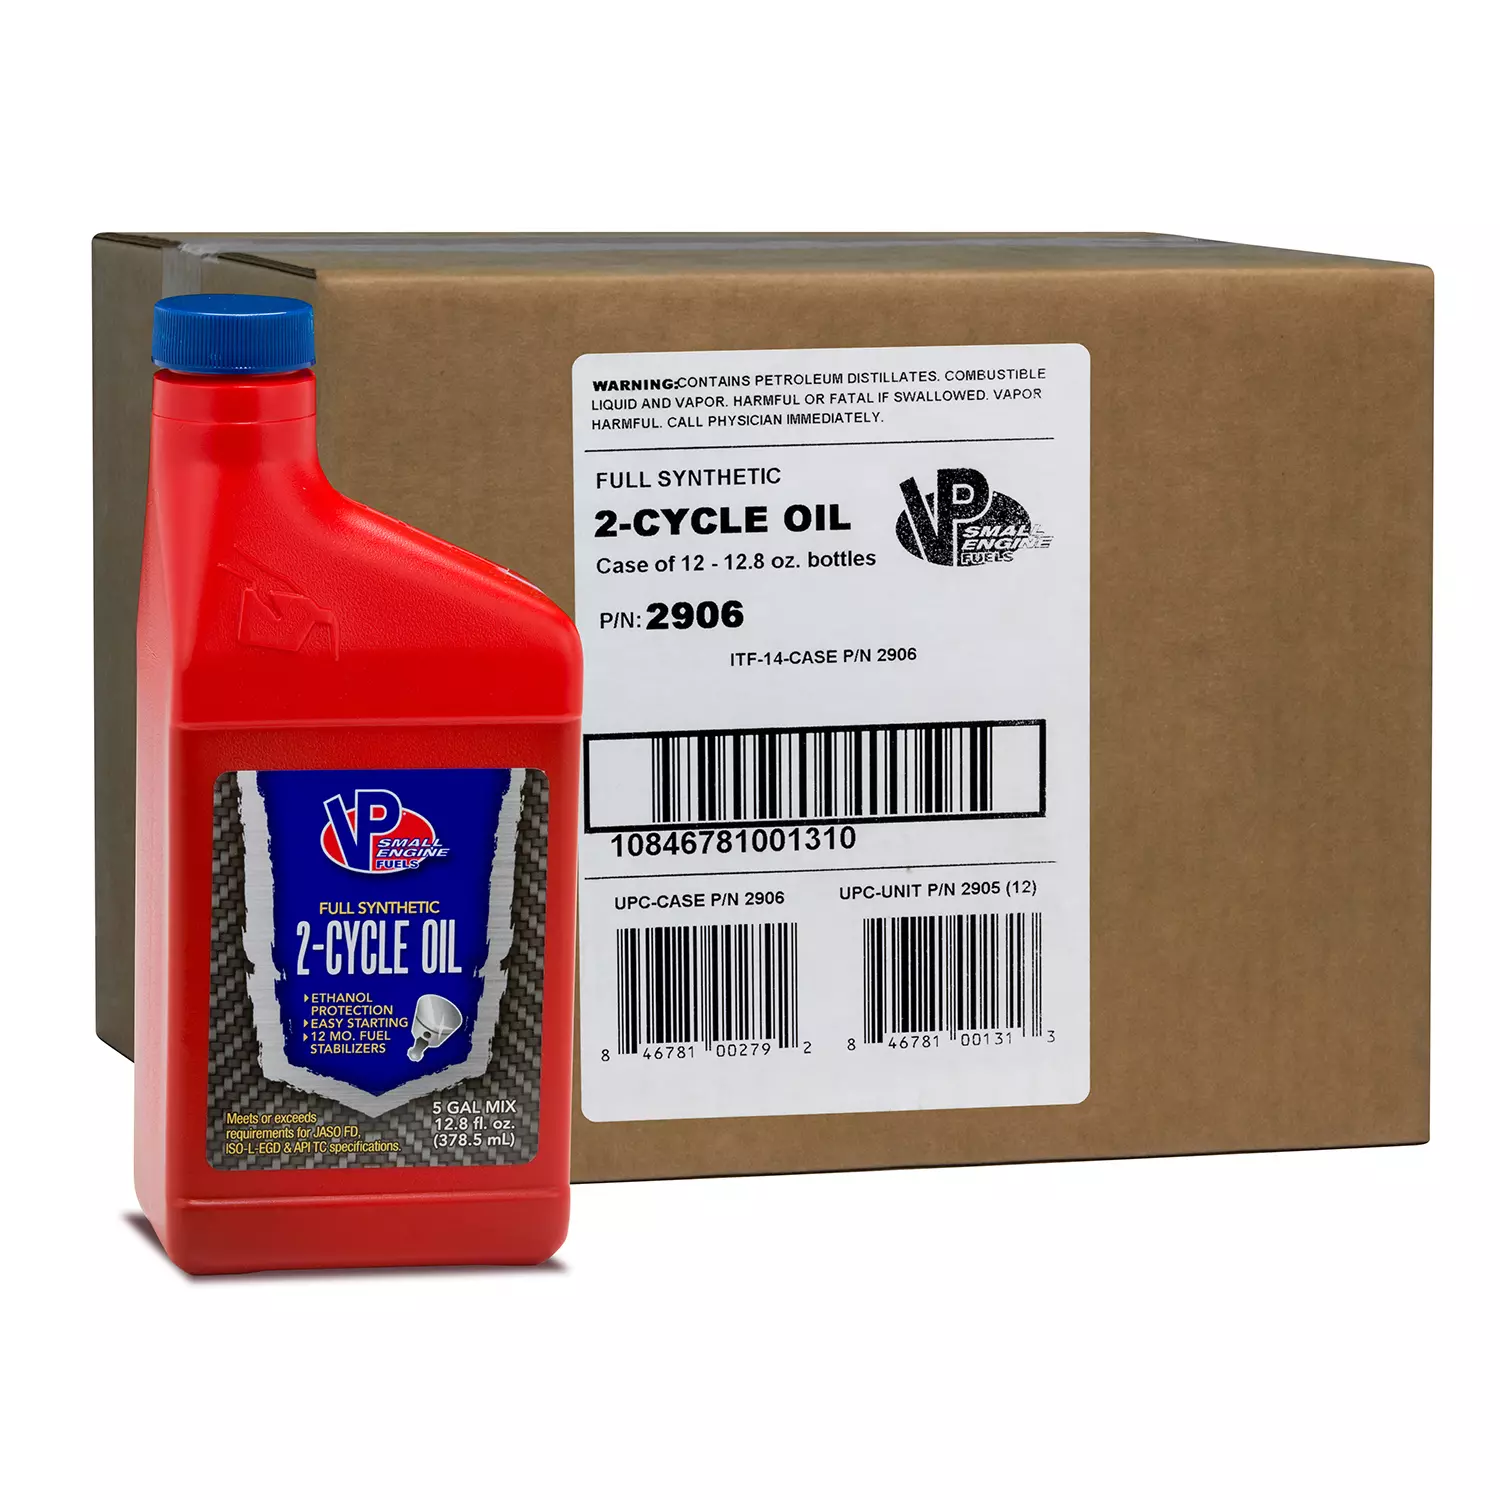 VP Small Engine Fuels Synthetic 2-Cycle Oil (12-pack/12.8oz bottles)